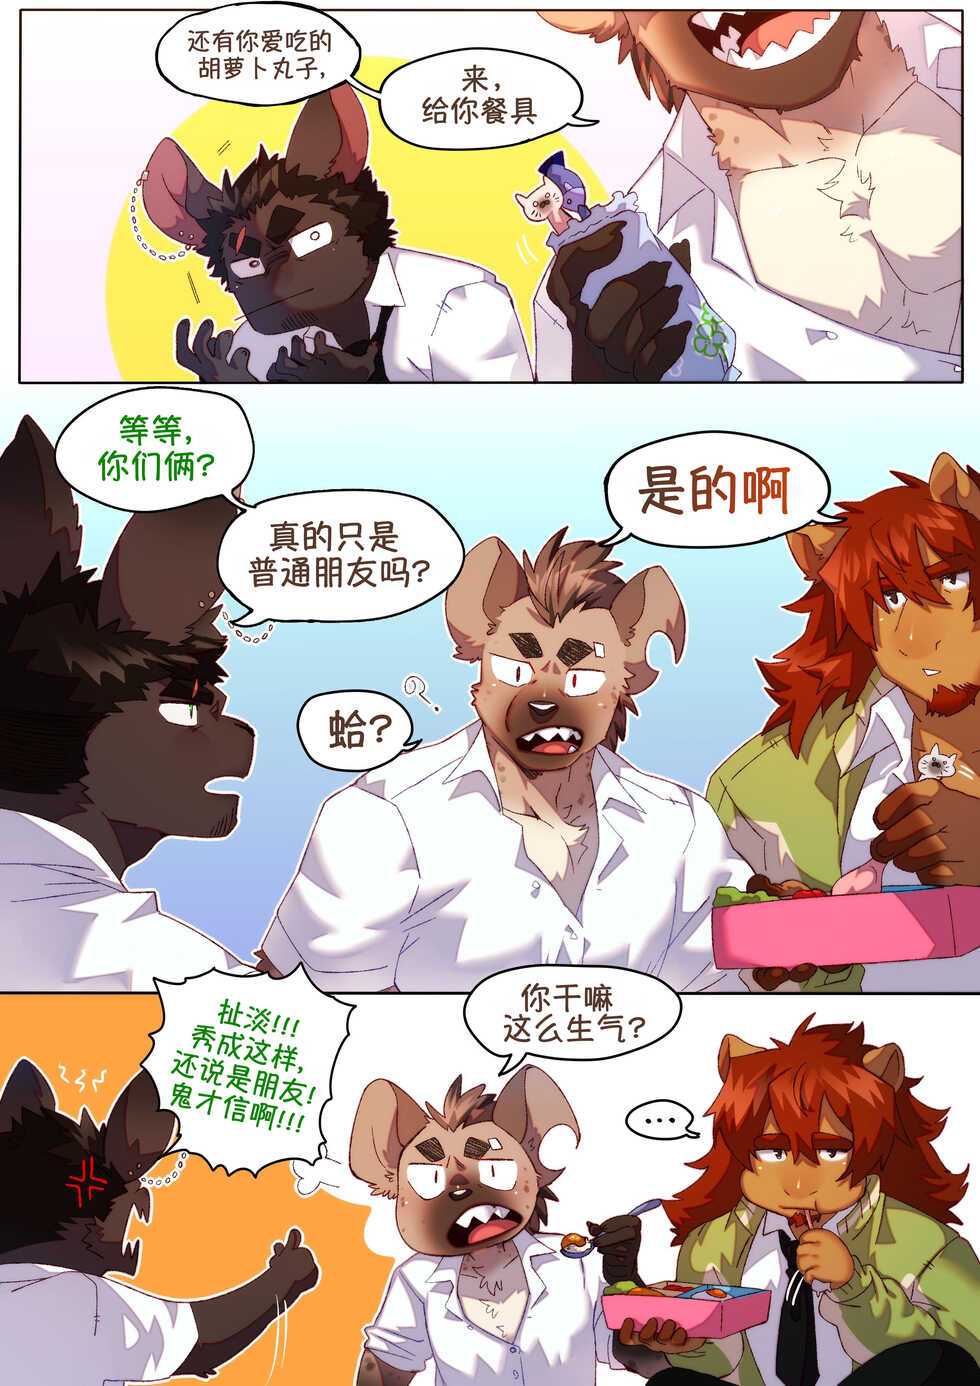 [BooBoo] Passionate Affection 深挚 [Chinese Ver.]  (On Going) - Page 8